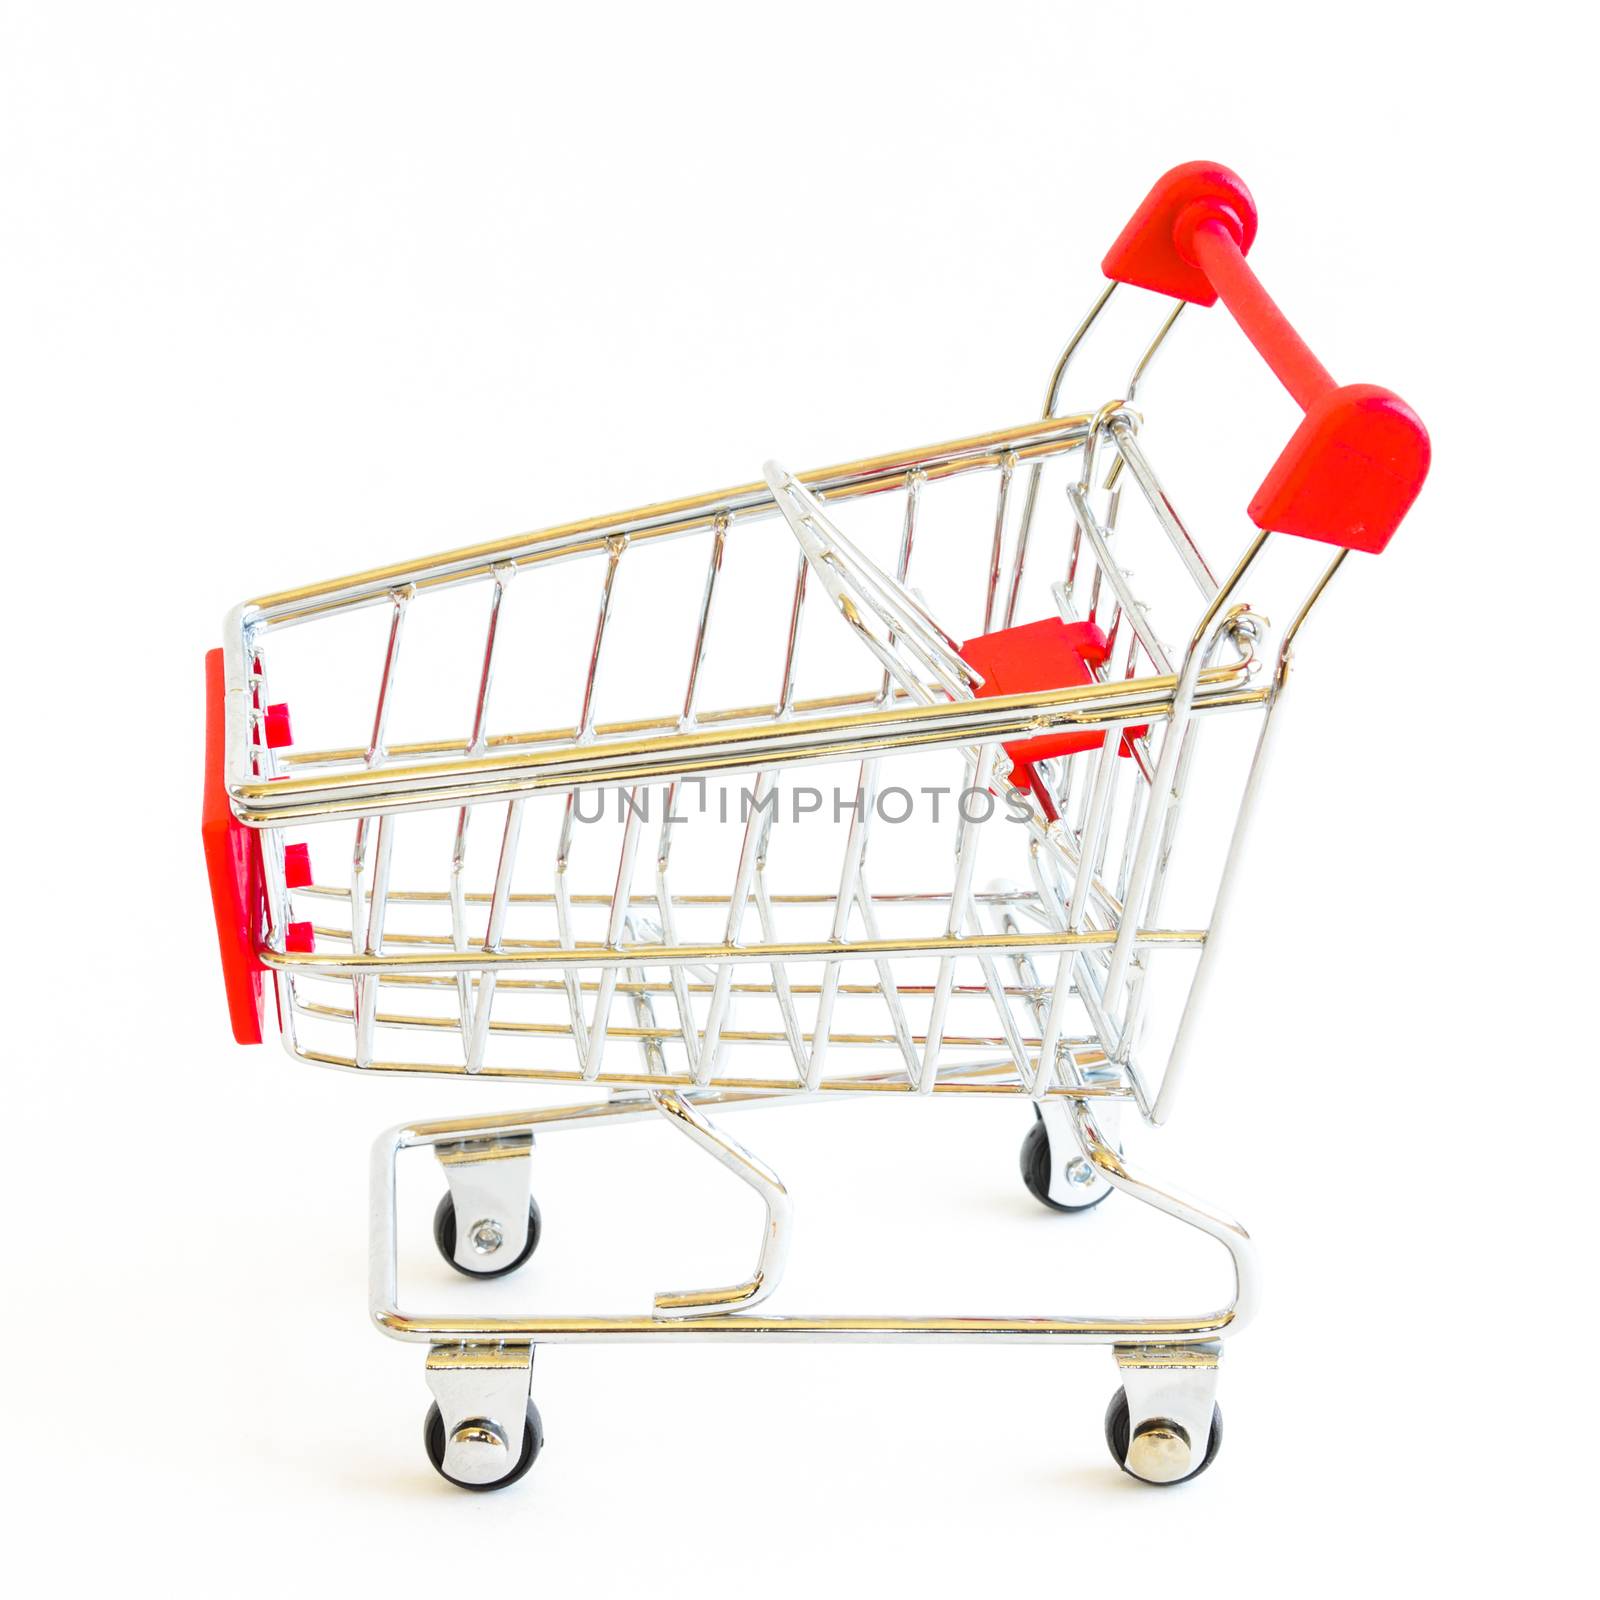 Small shopping cart isolated on white background. Tiny silver and red metallic empty push cart. Concept for online shopping and e-commerce.